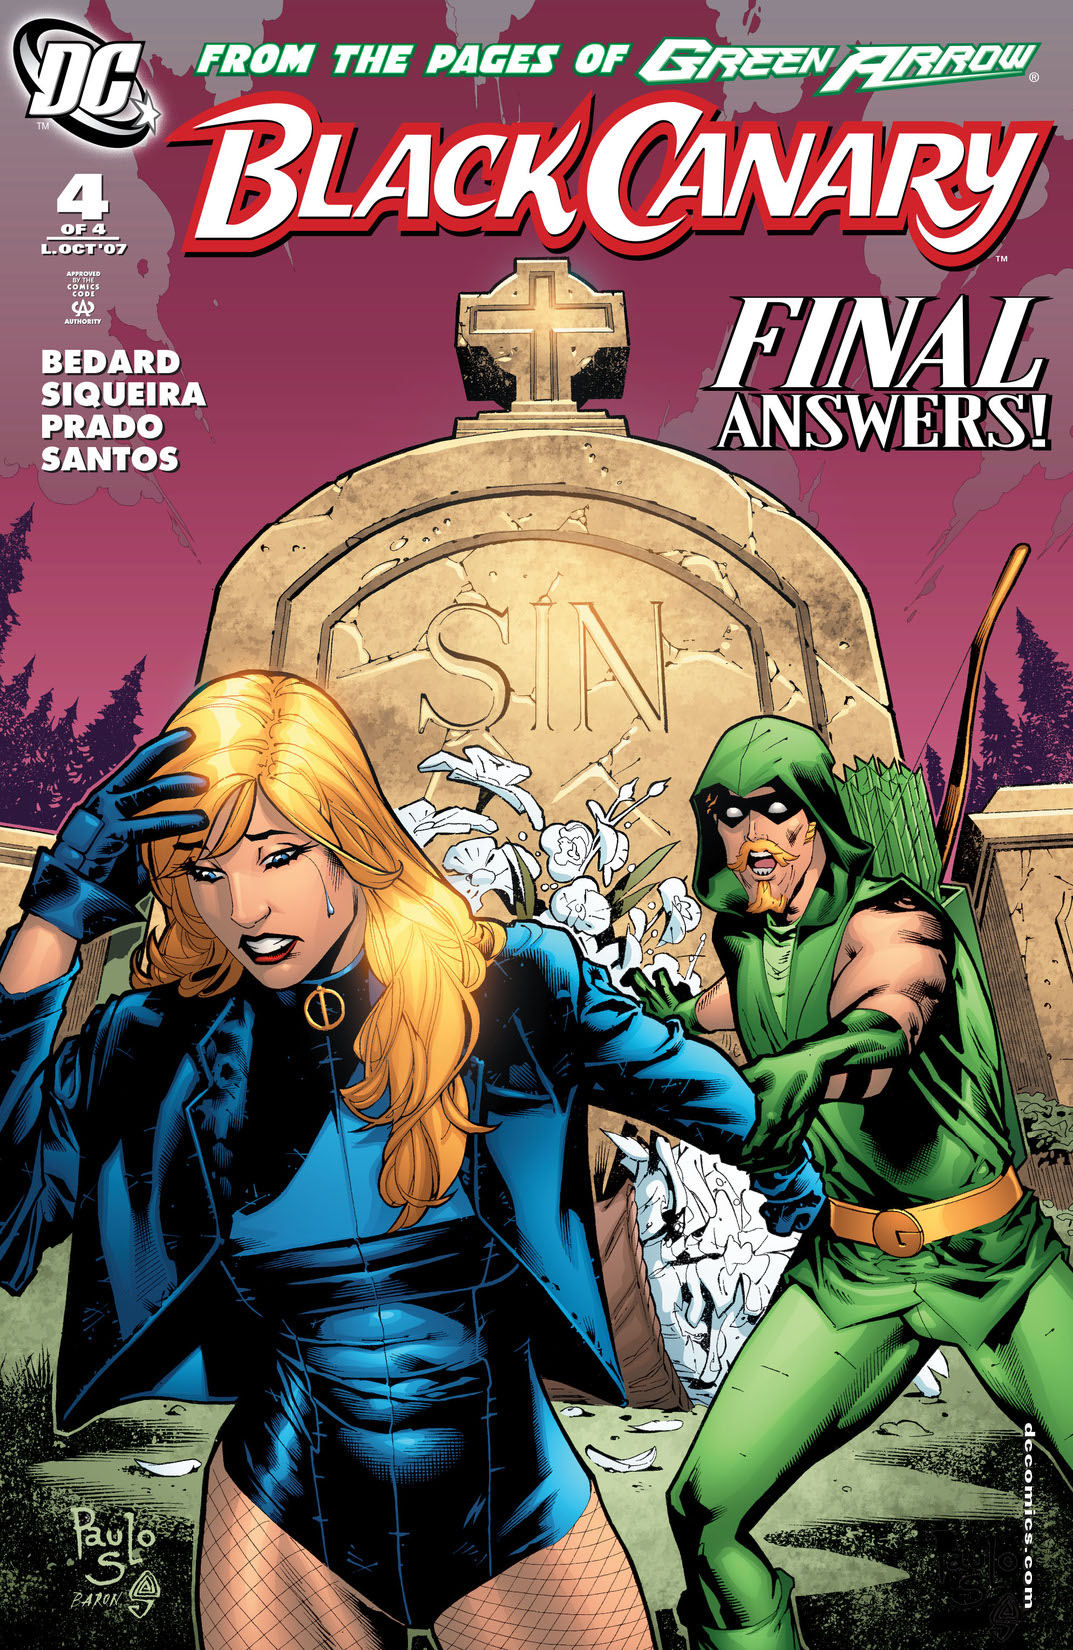 Black Canary (2007-) #4 preview images